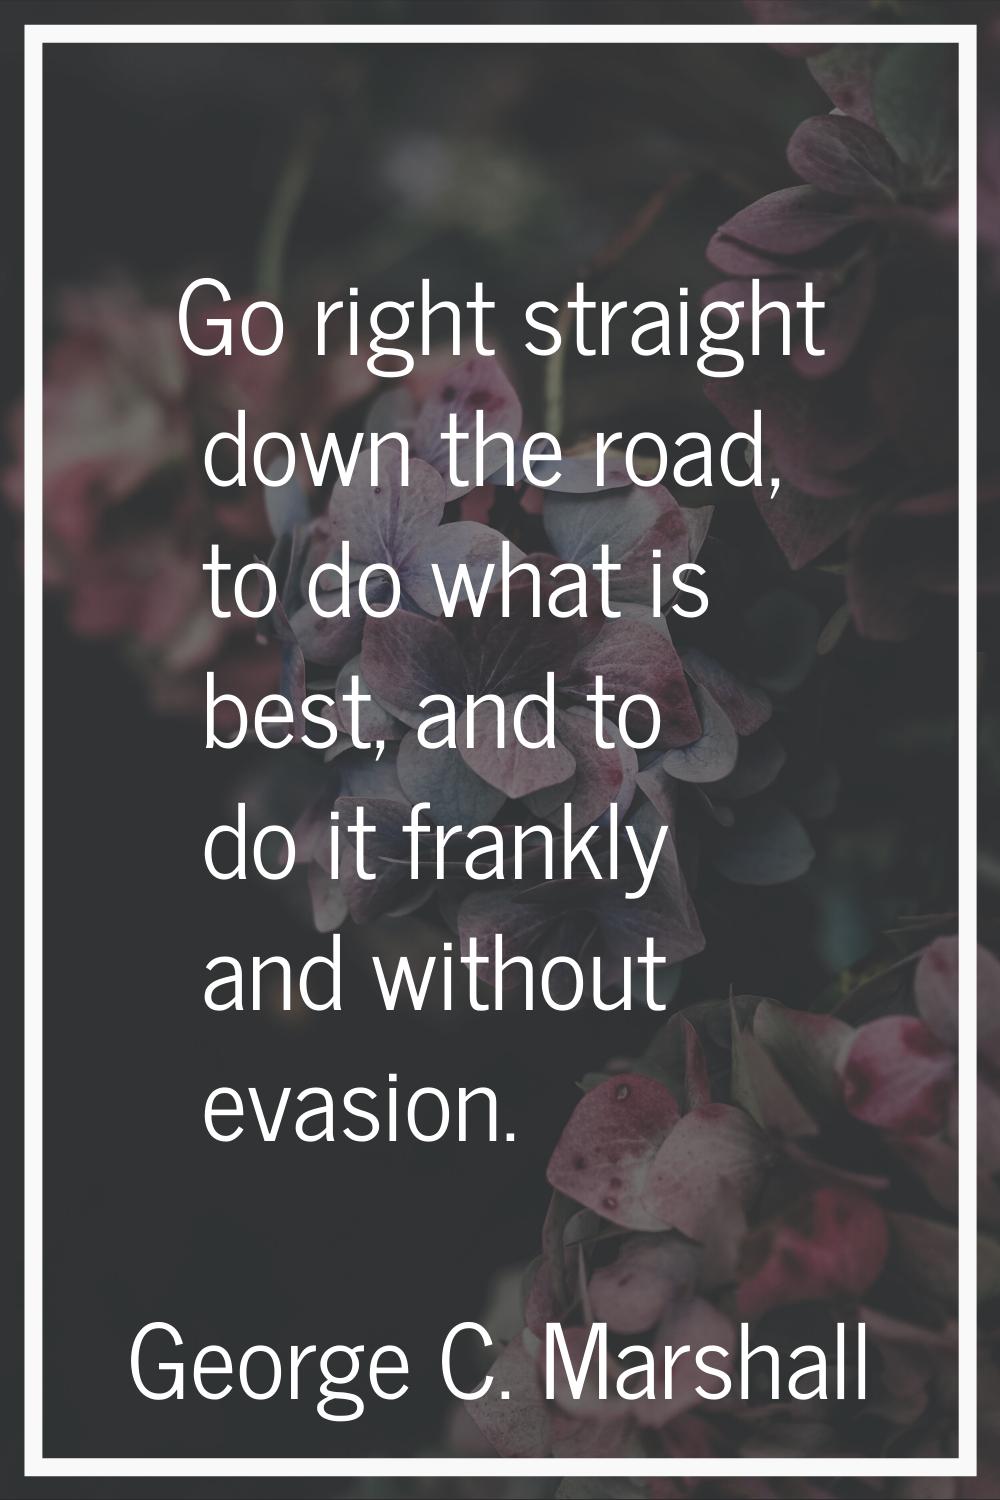 Go right straight down the road, to do what is best, and to do it frankly and without evasion.